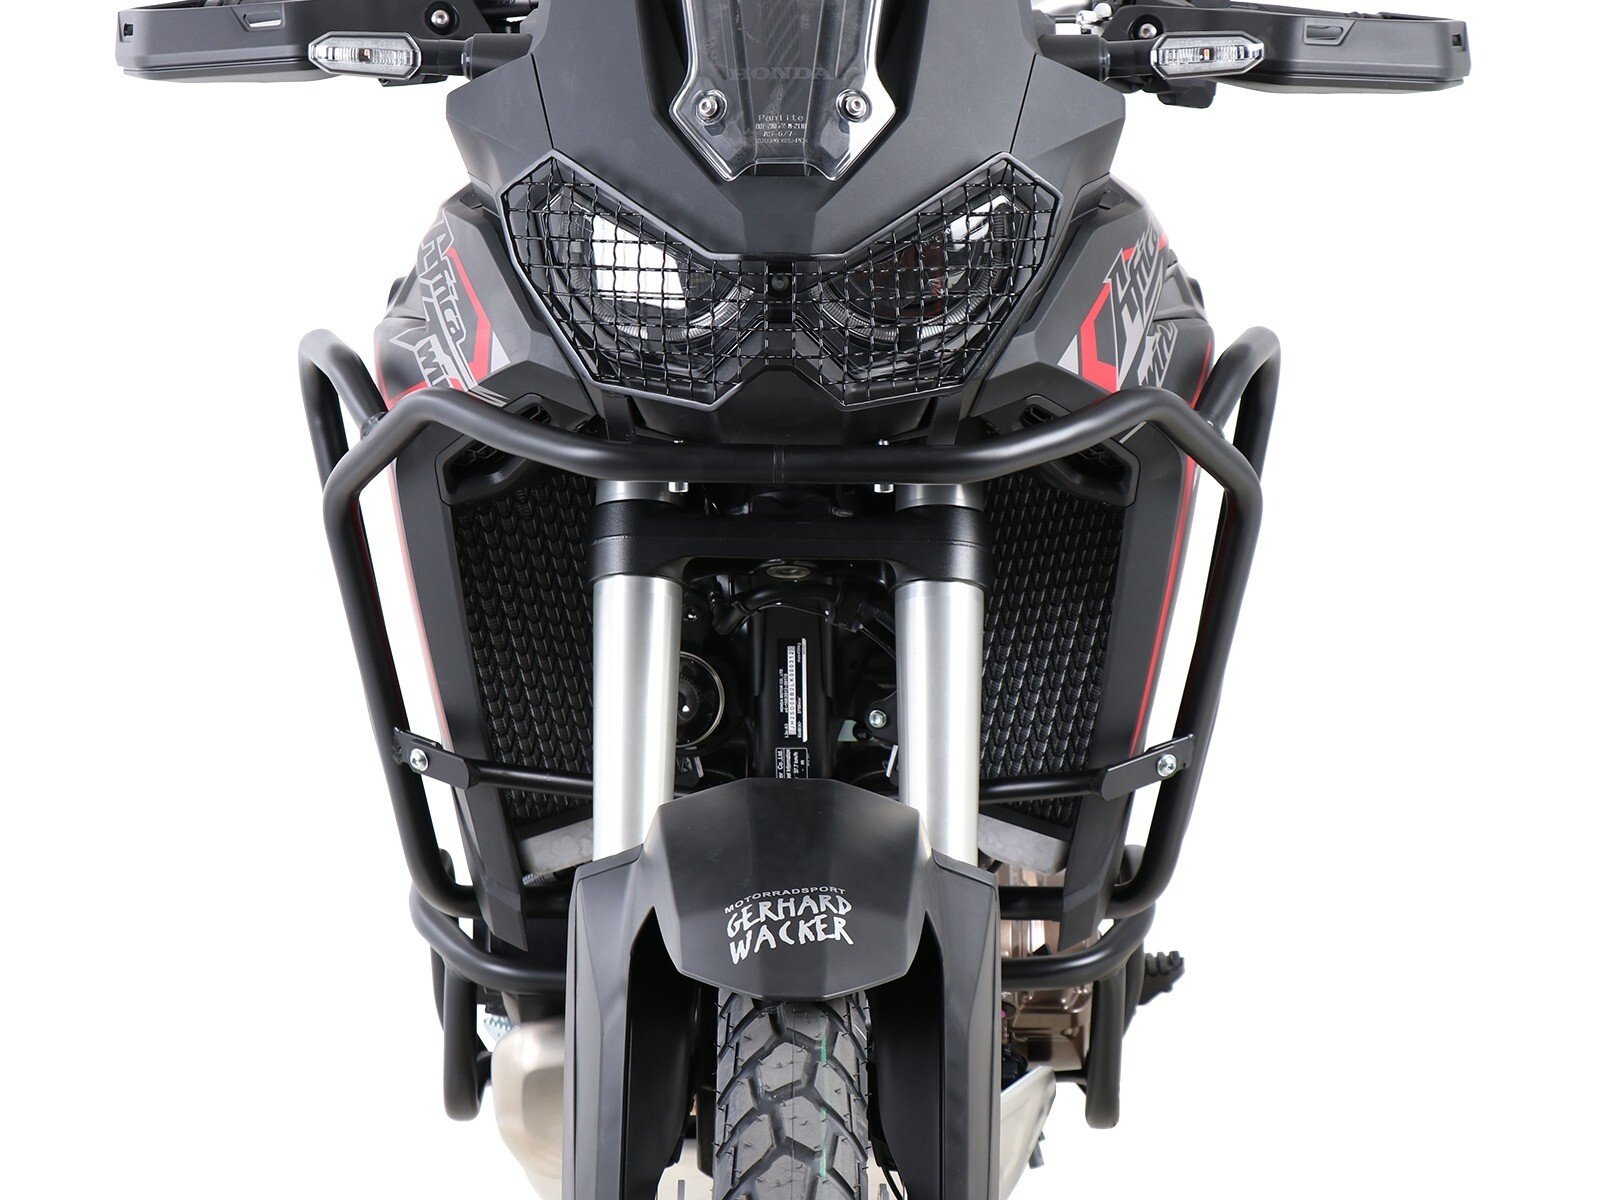 Hepco Upper Engine/Tank Protection Honda CRF 1100 L Africa Twin 2019- Black